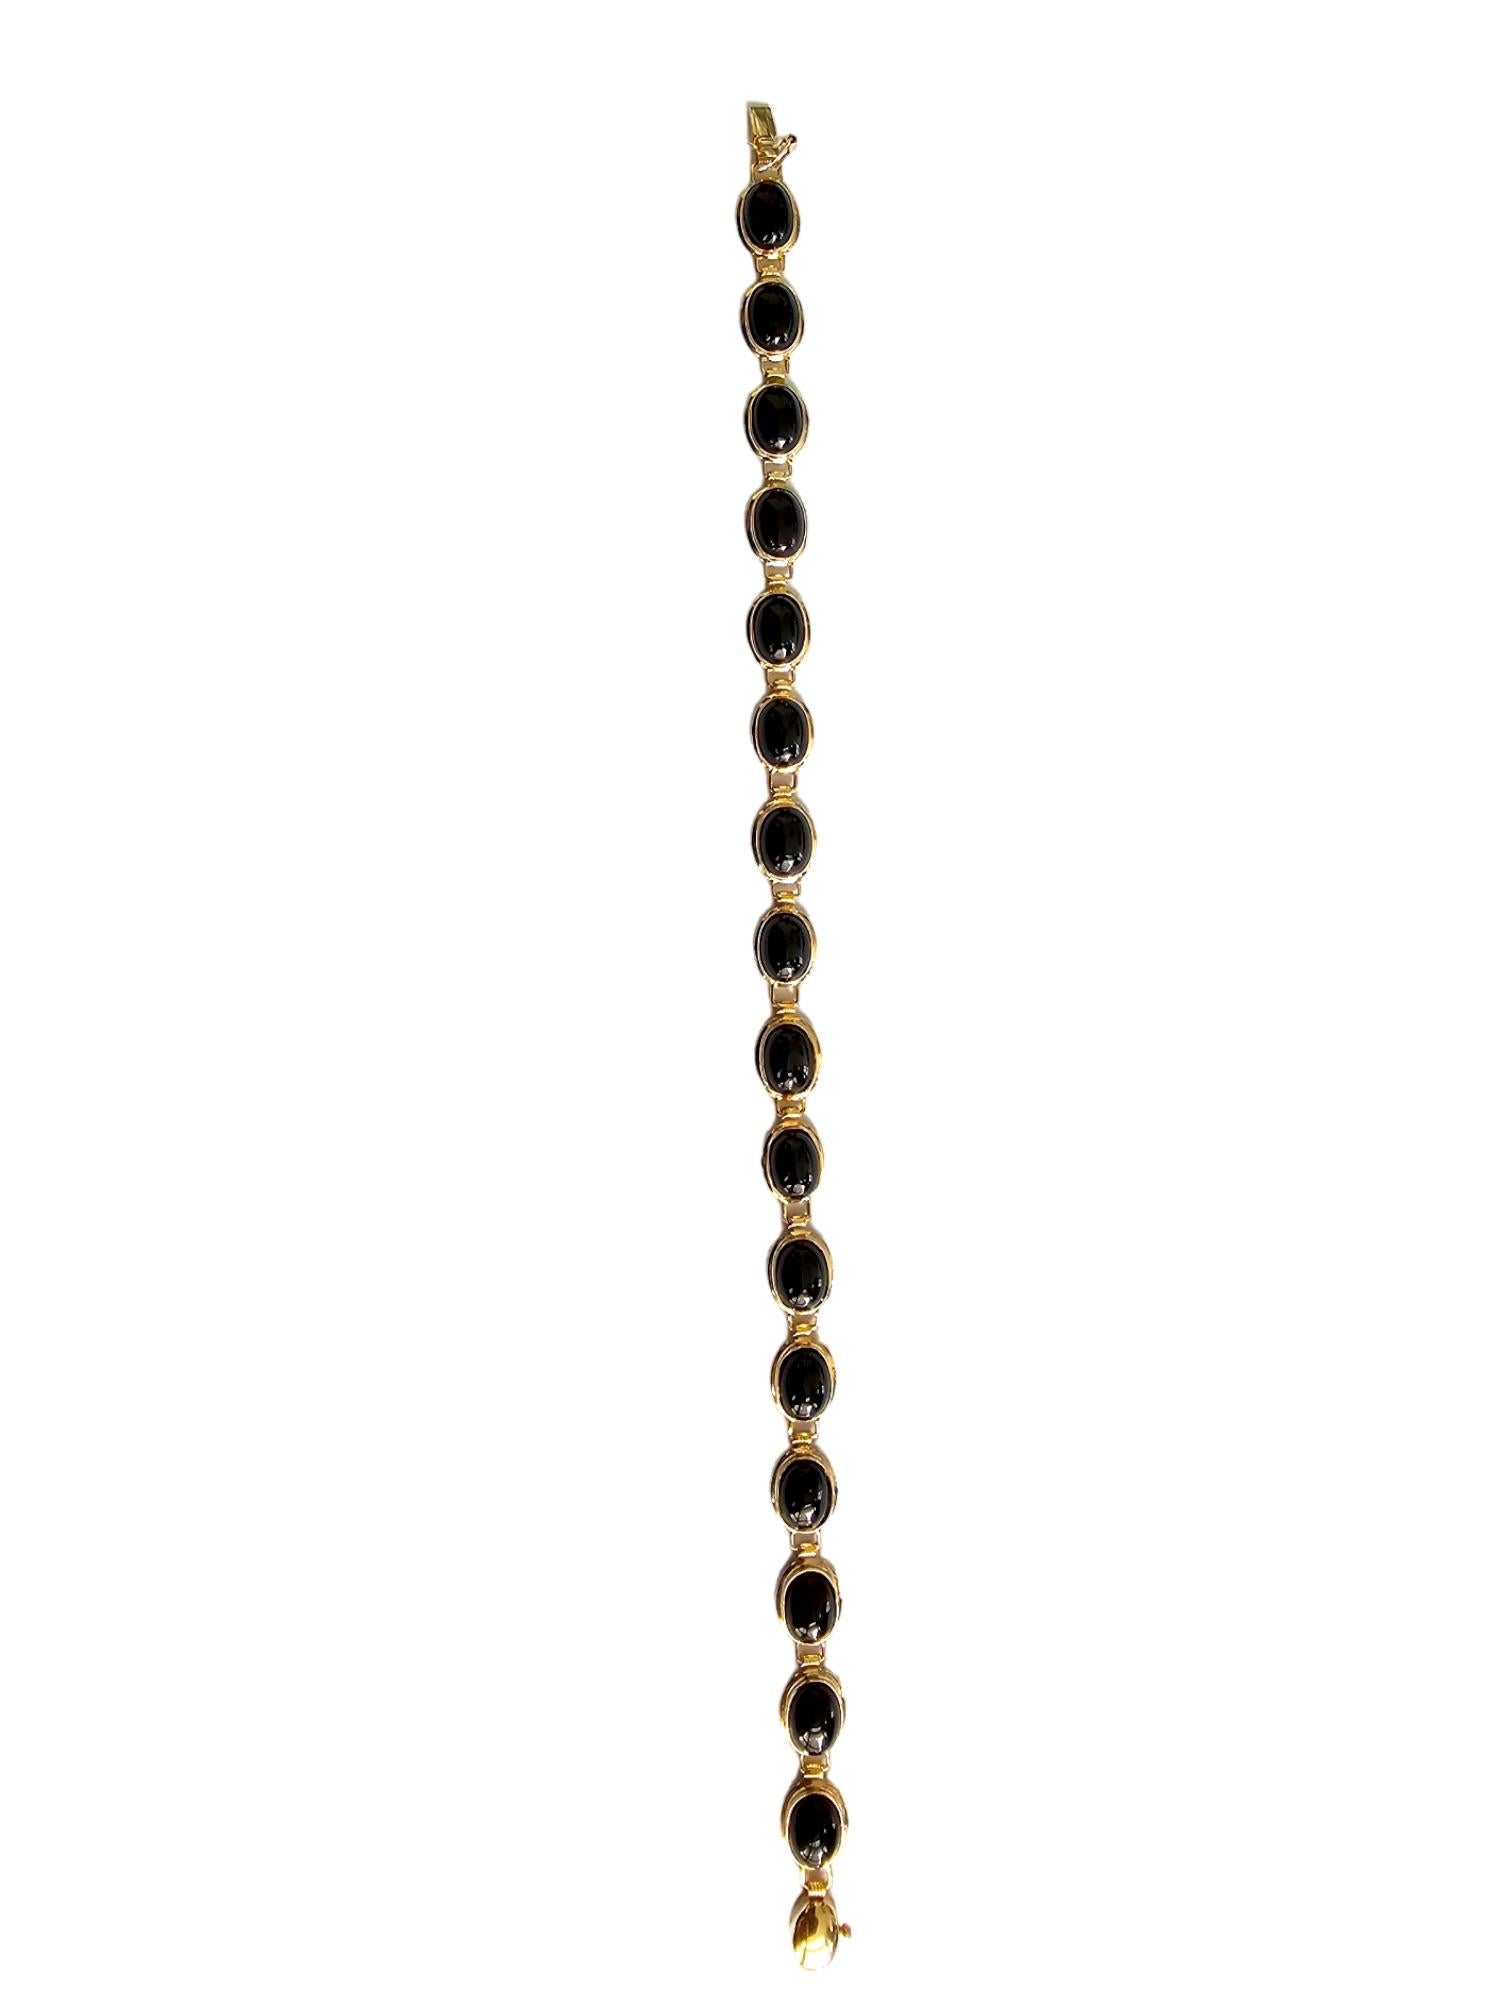 Tibetan Black Onyx Beaded Bracelet (with 14K Solid Yellow Gold) For Sale 7